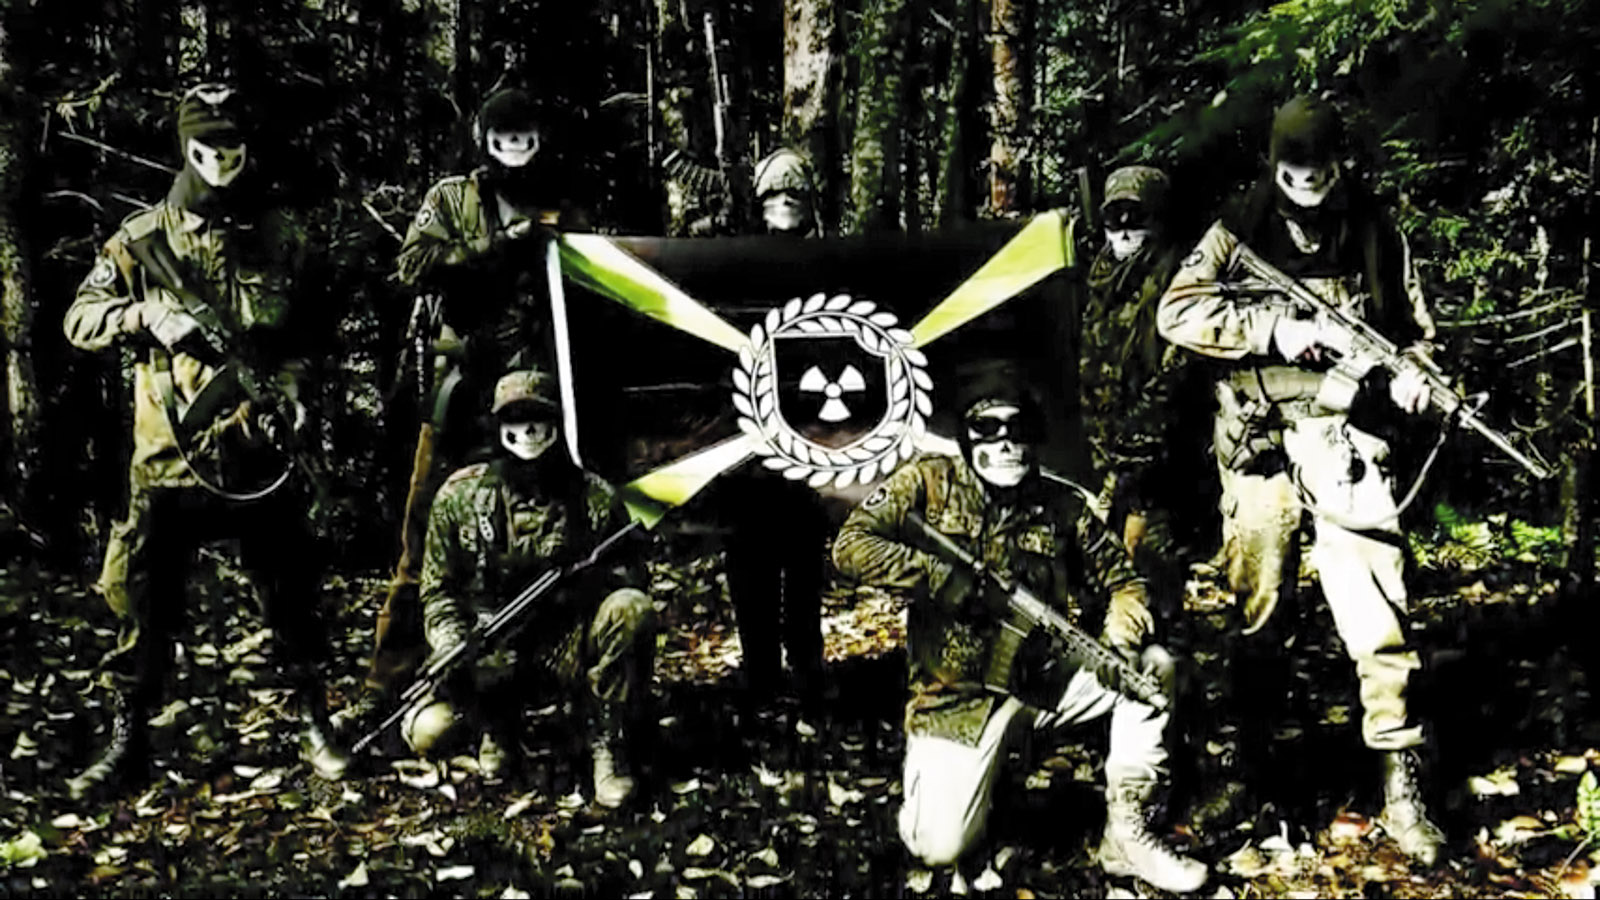 A screenshot from a recruitment video for the American neo-Nazi group Atomwaffen Division, May 2019